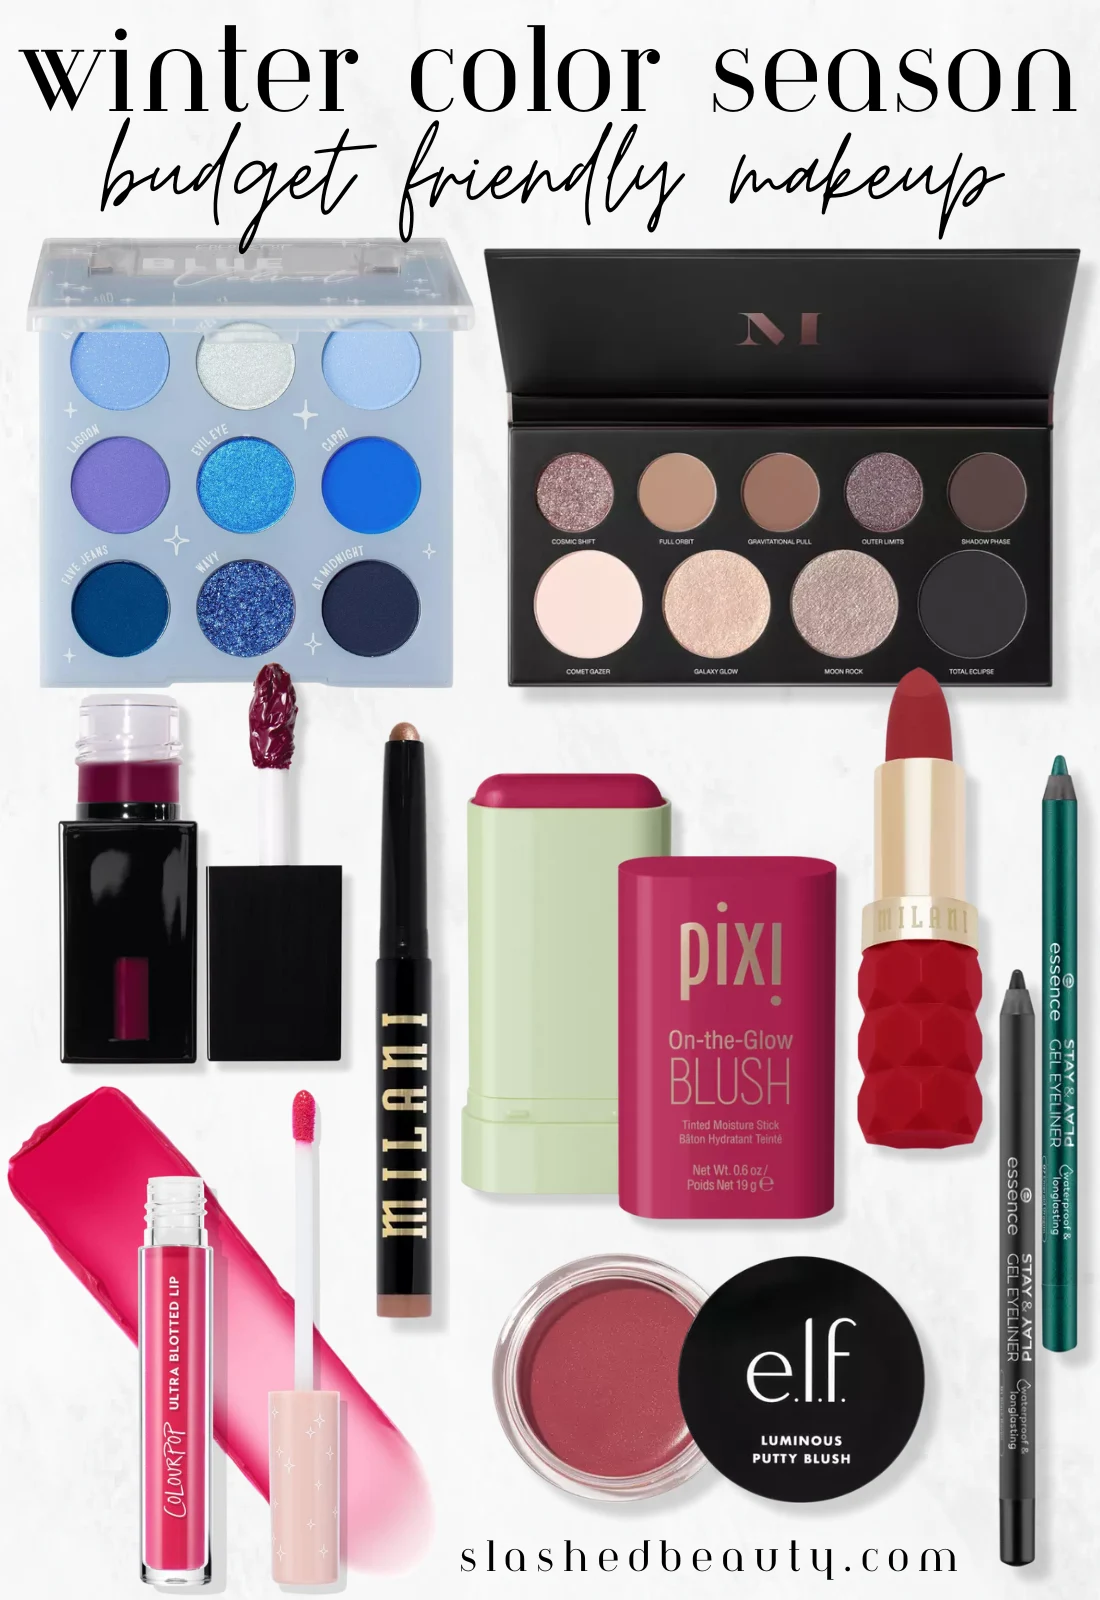 Collage of drugstore makeup with text headline: Winter Color Season Budget Friendly Makeup